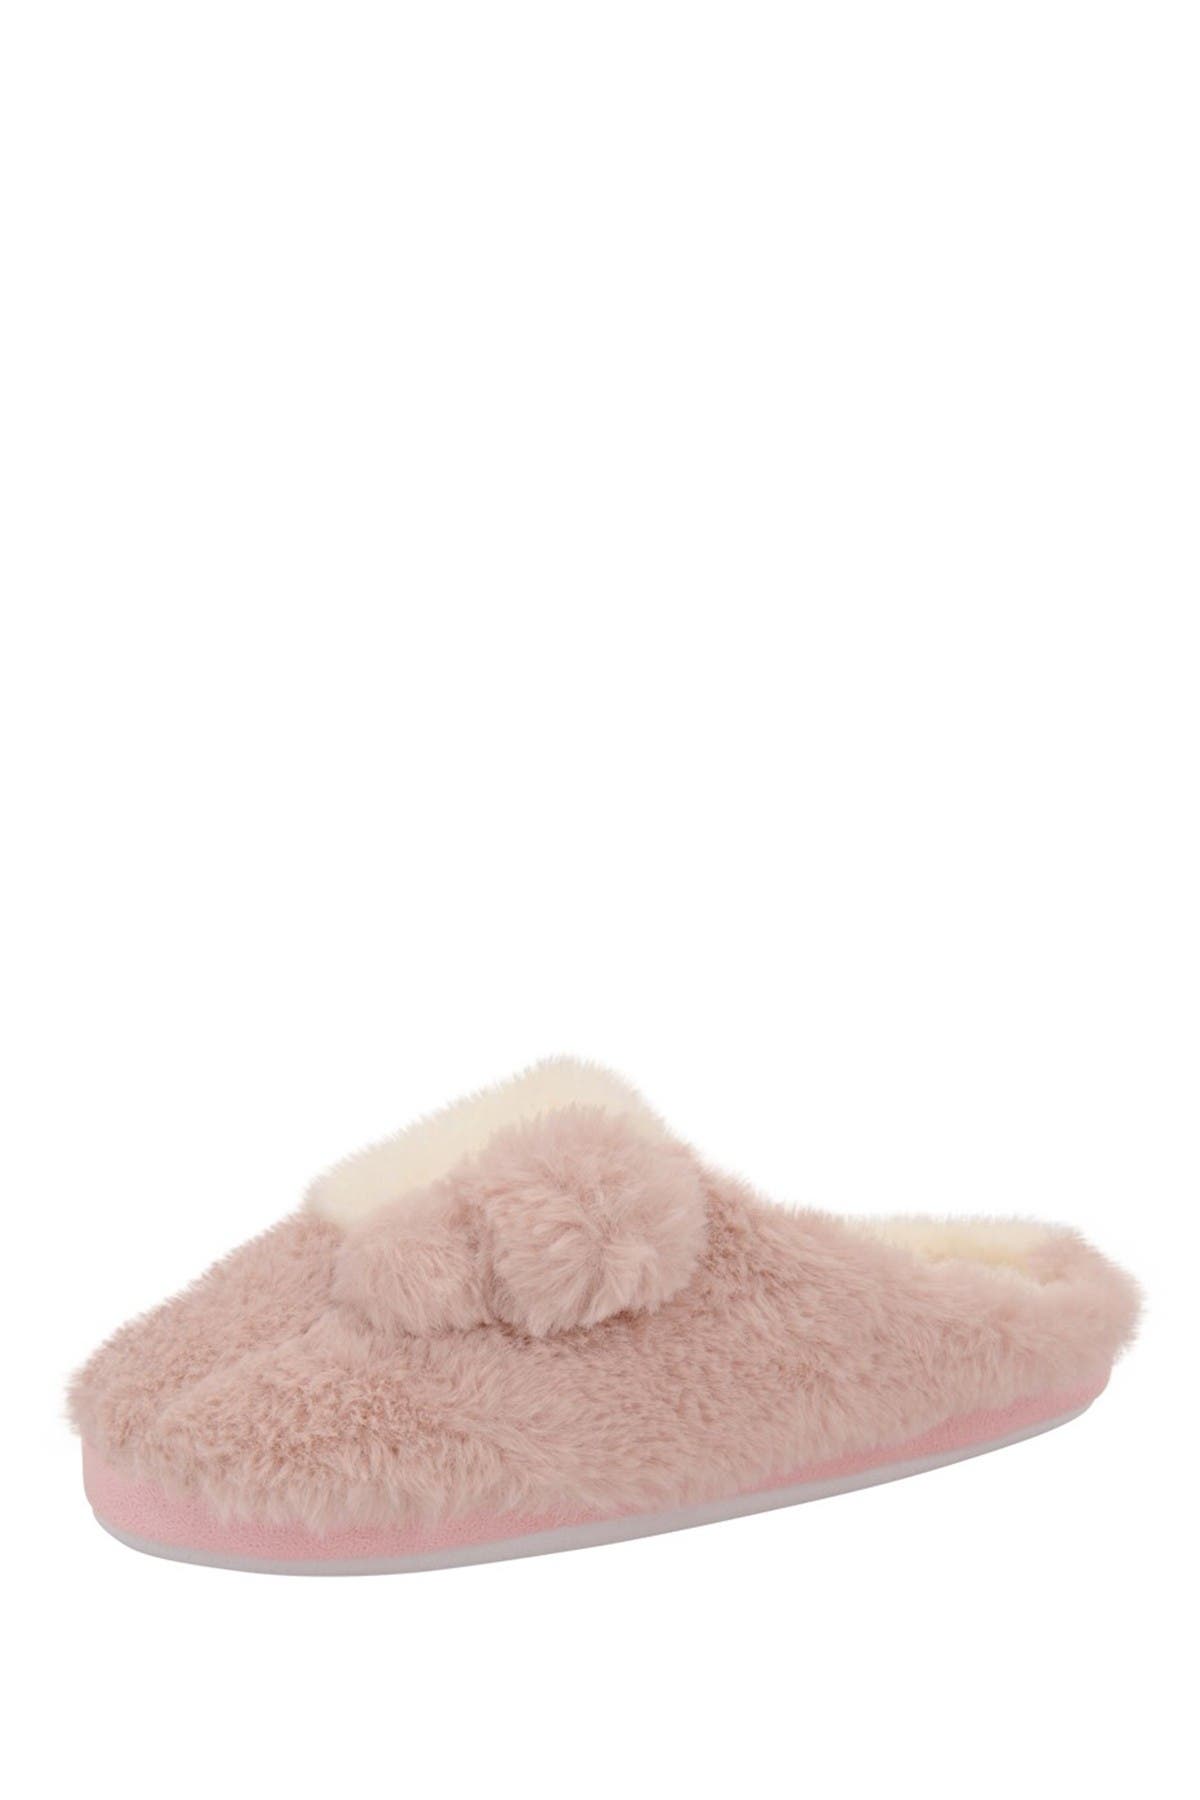 patricia green fur slippers